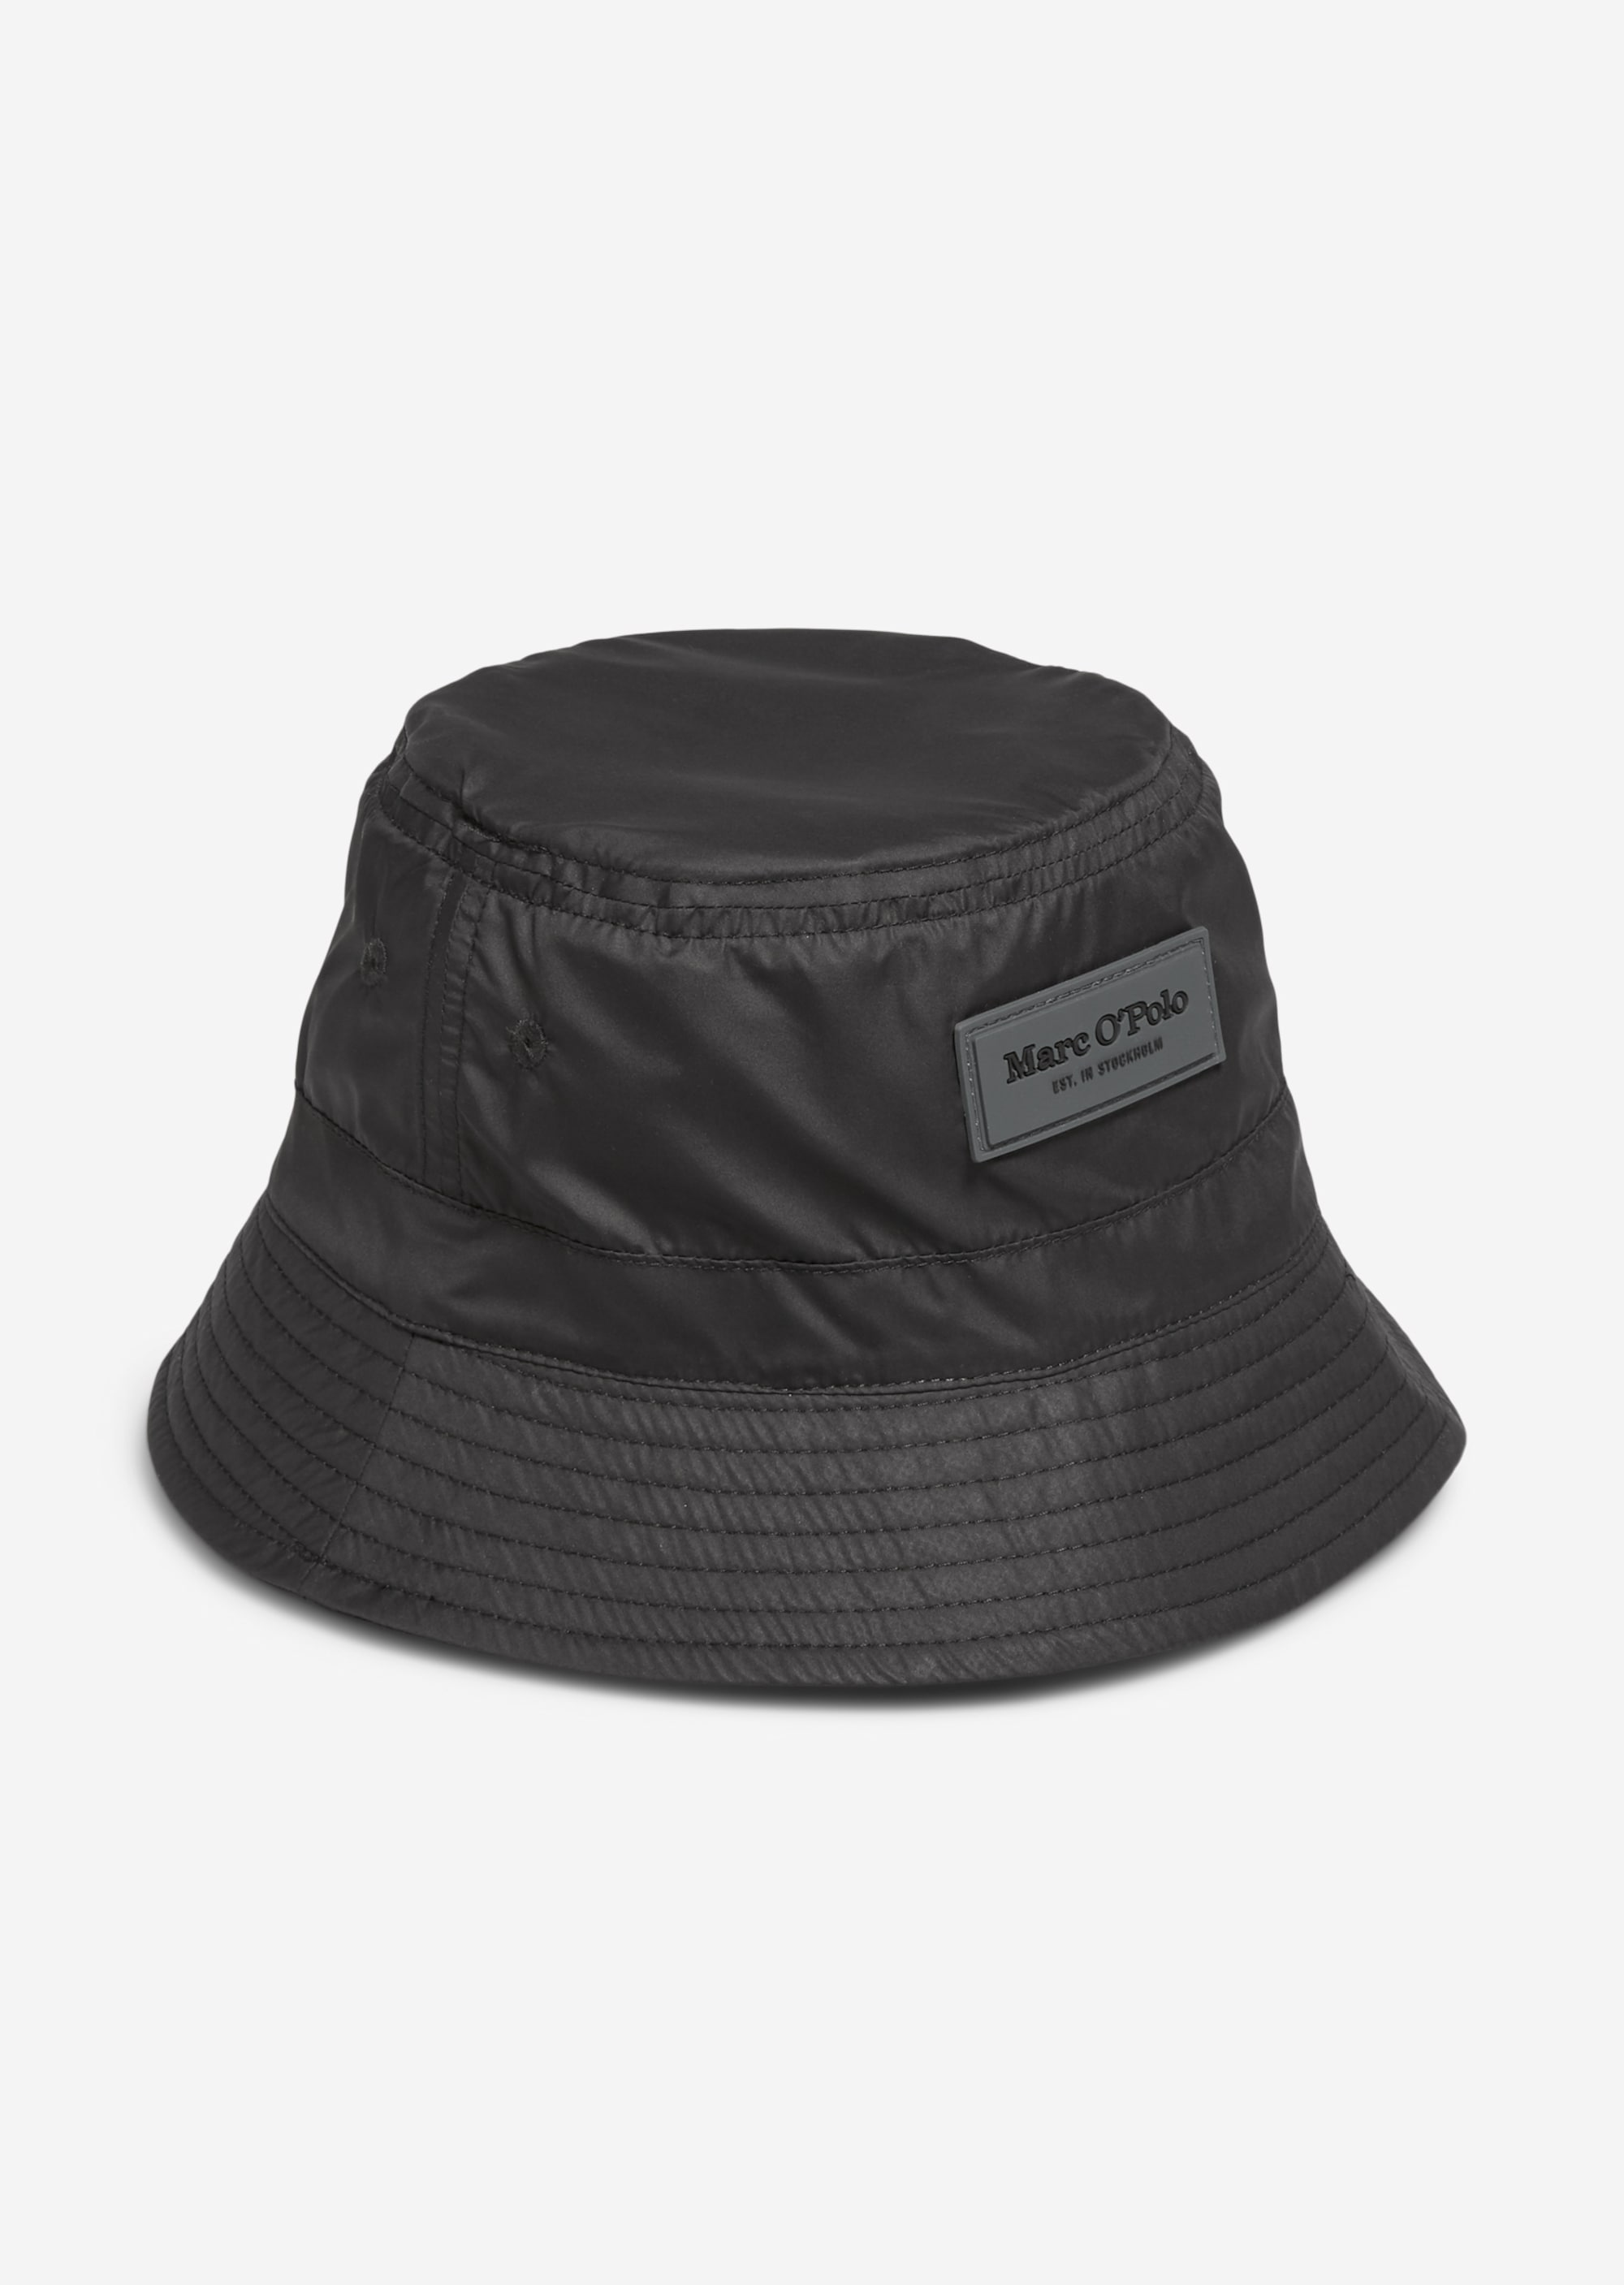 Fishing hat made of lightweight recycled material - black